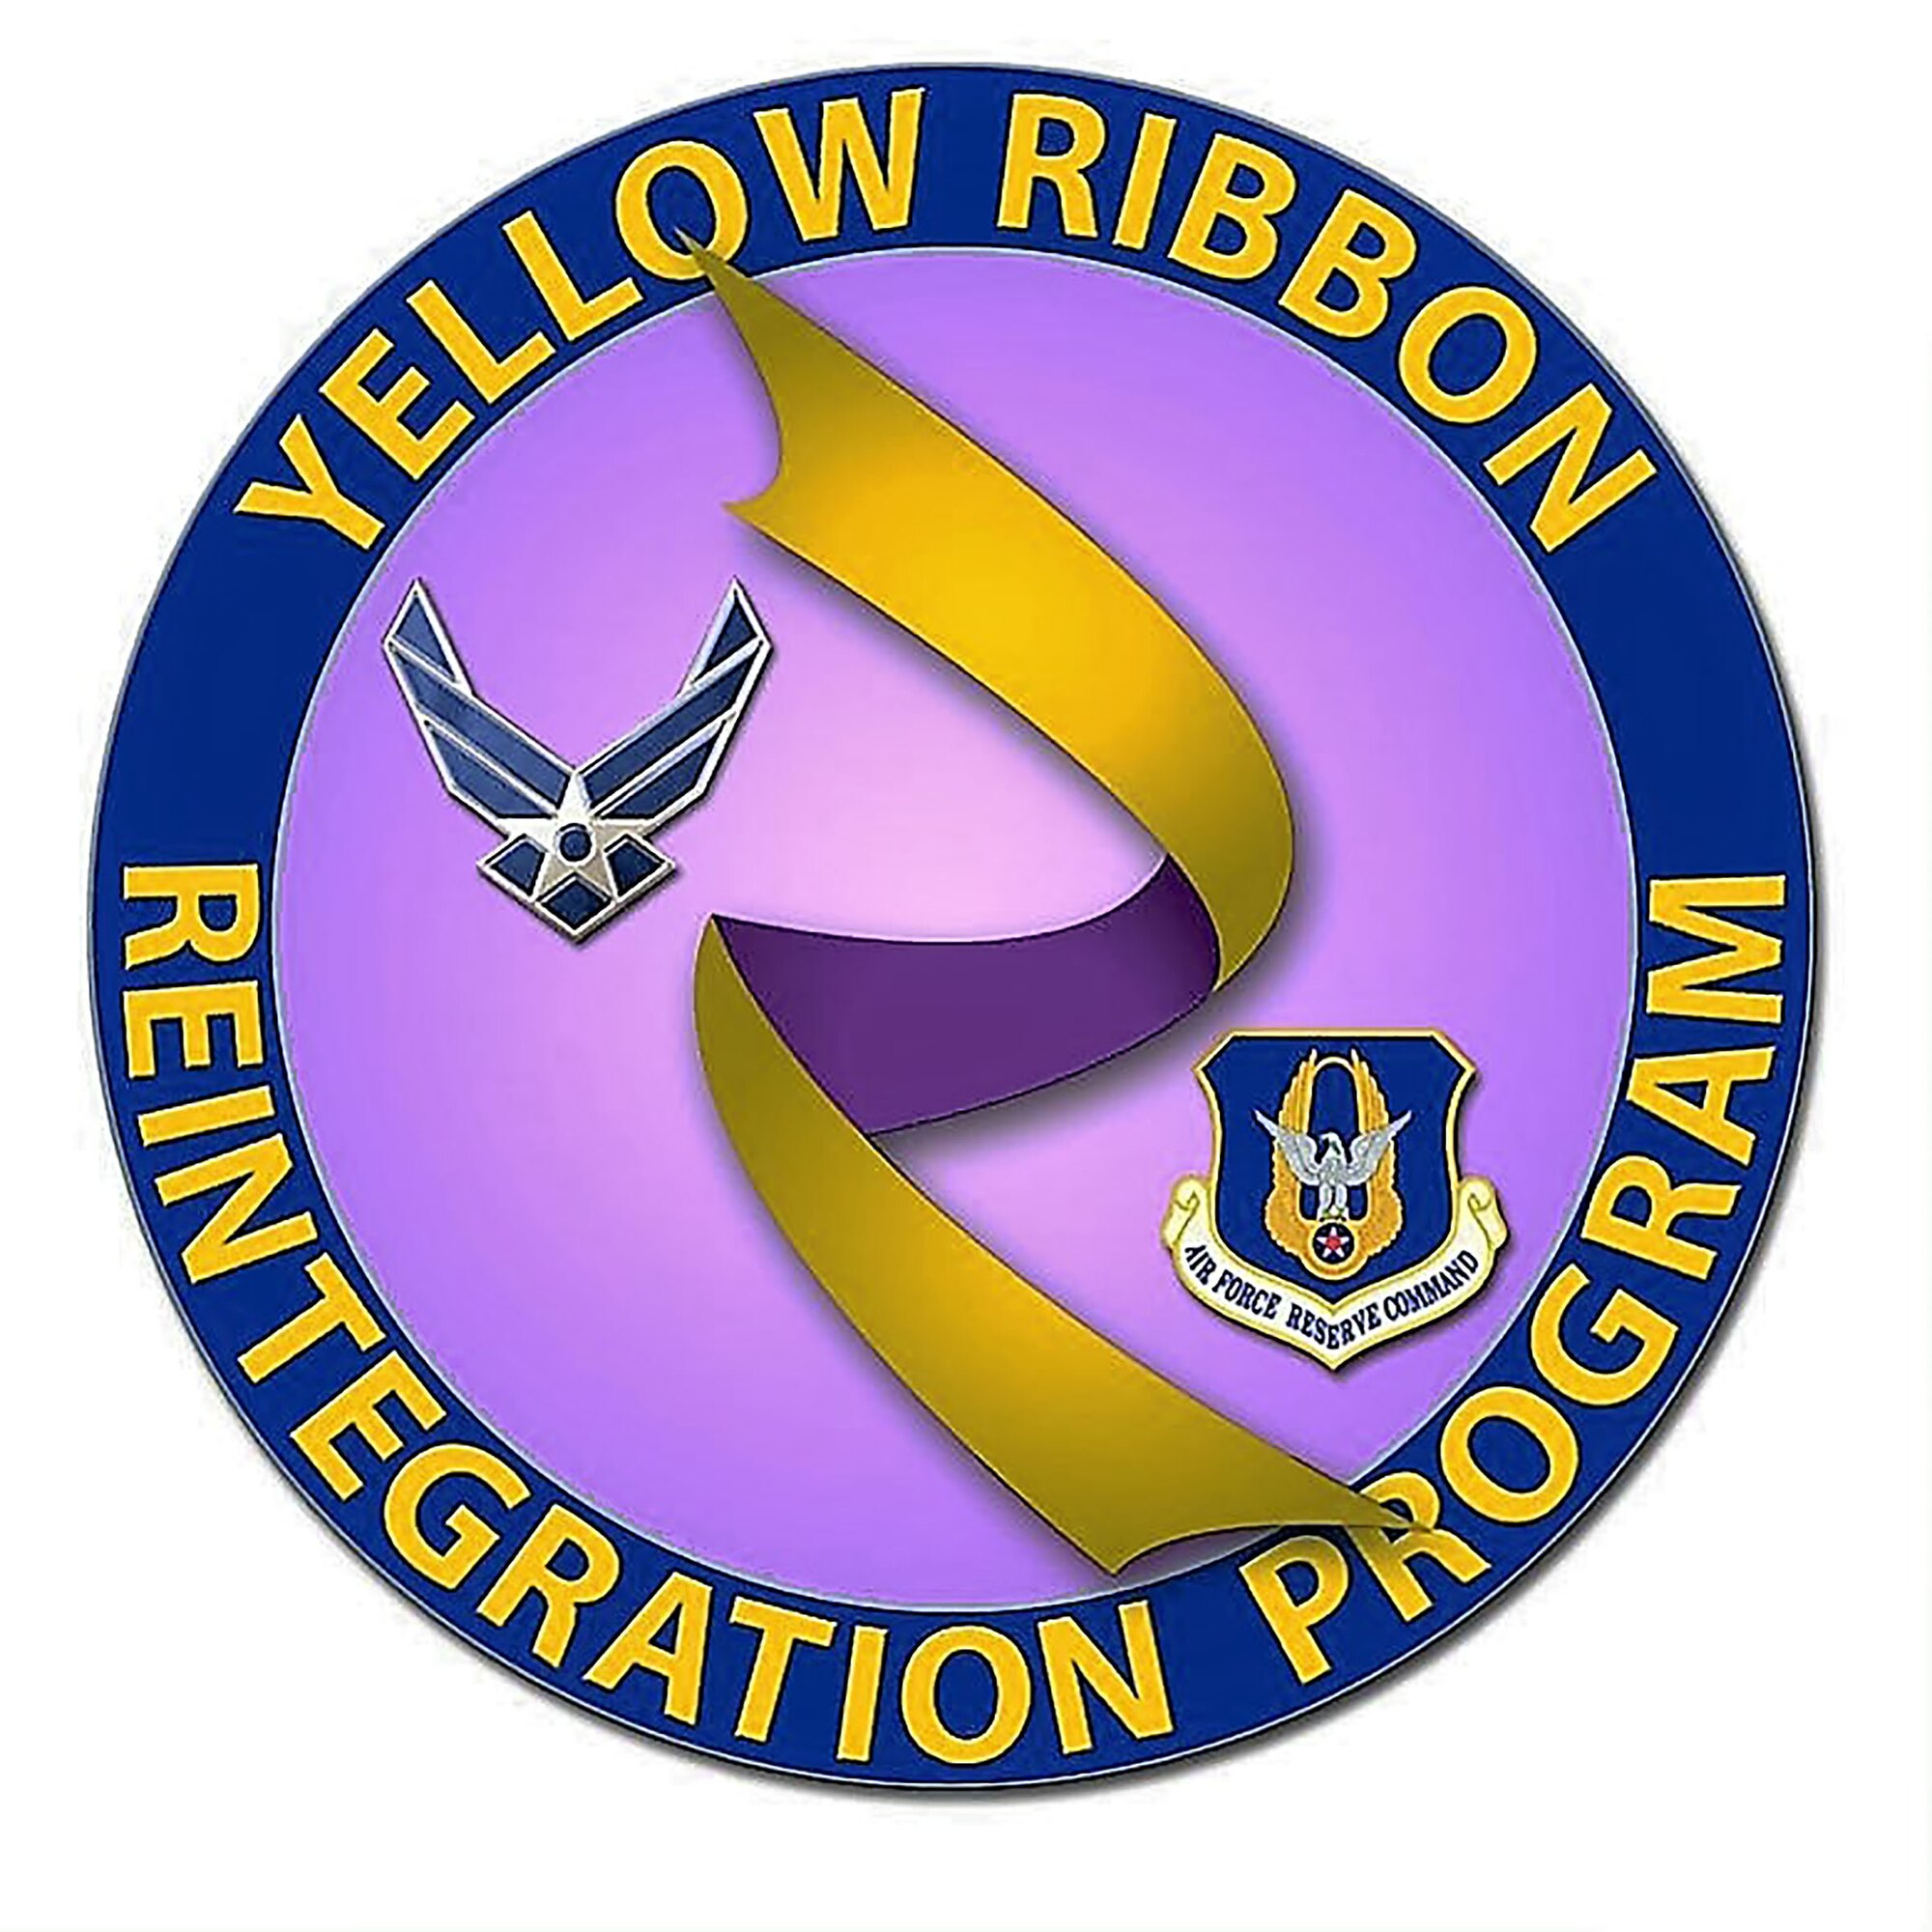 The Yellow Ribbon Reintegration Program is designed to assist Guard and Reserve members with transitioning between their military and civilian roles.